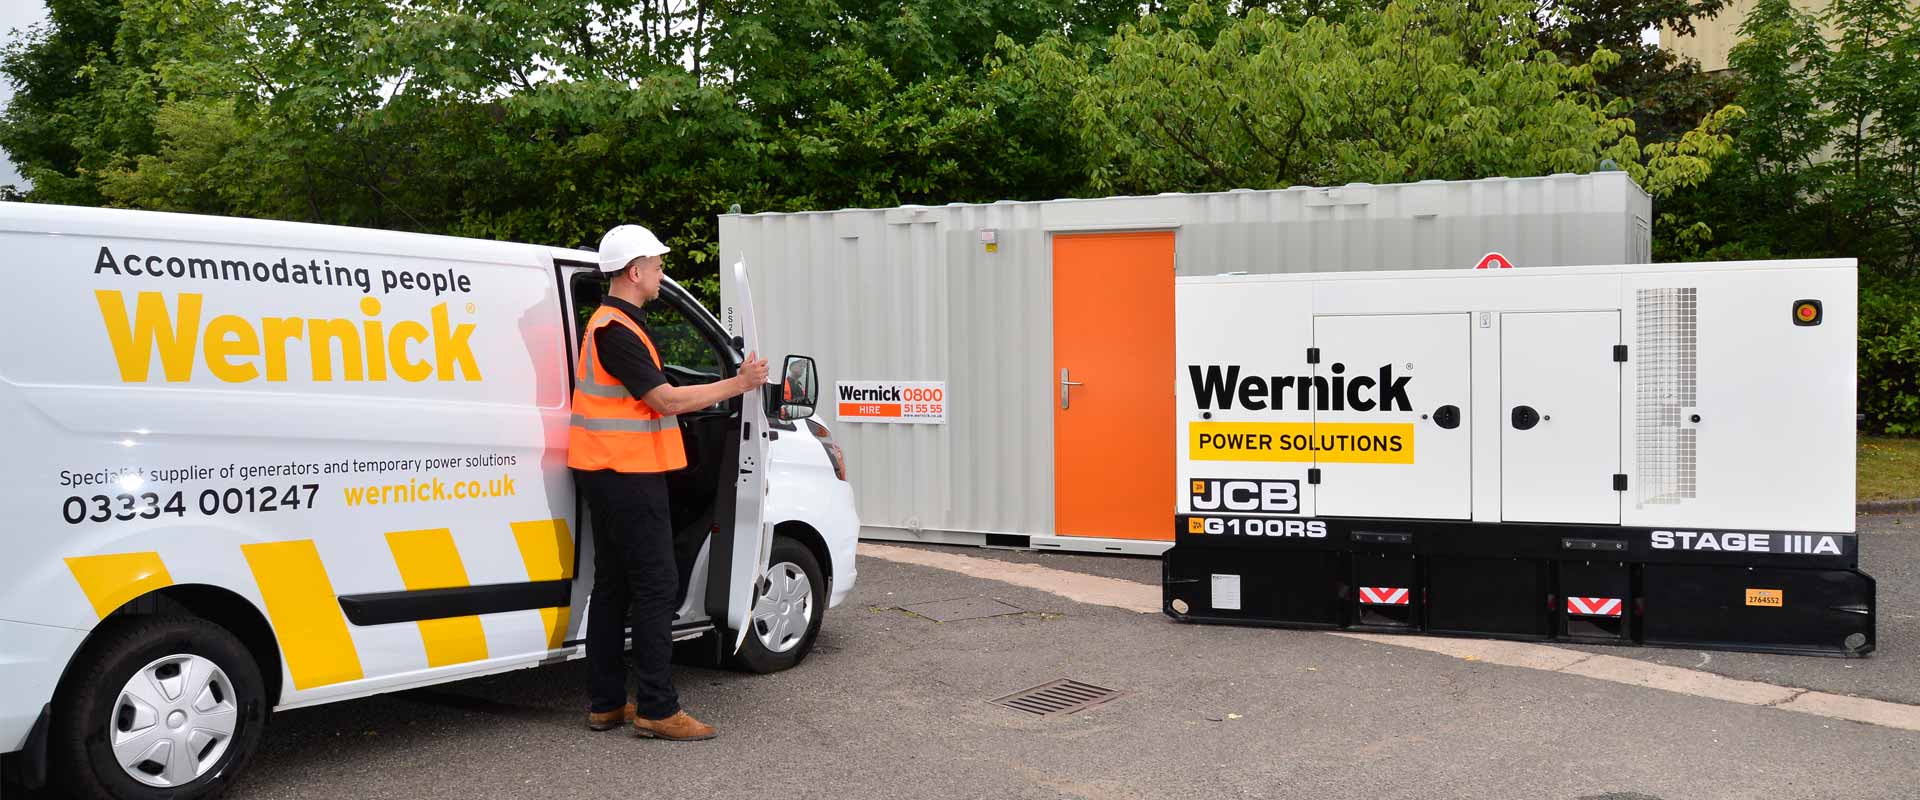 Wernick Hire and Wernick Power